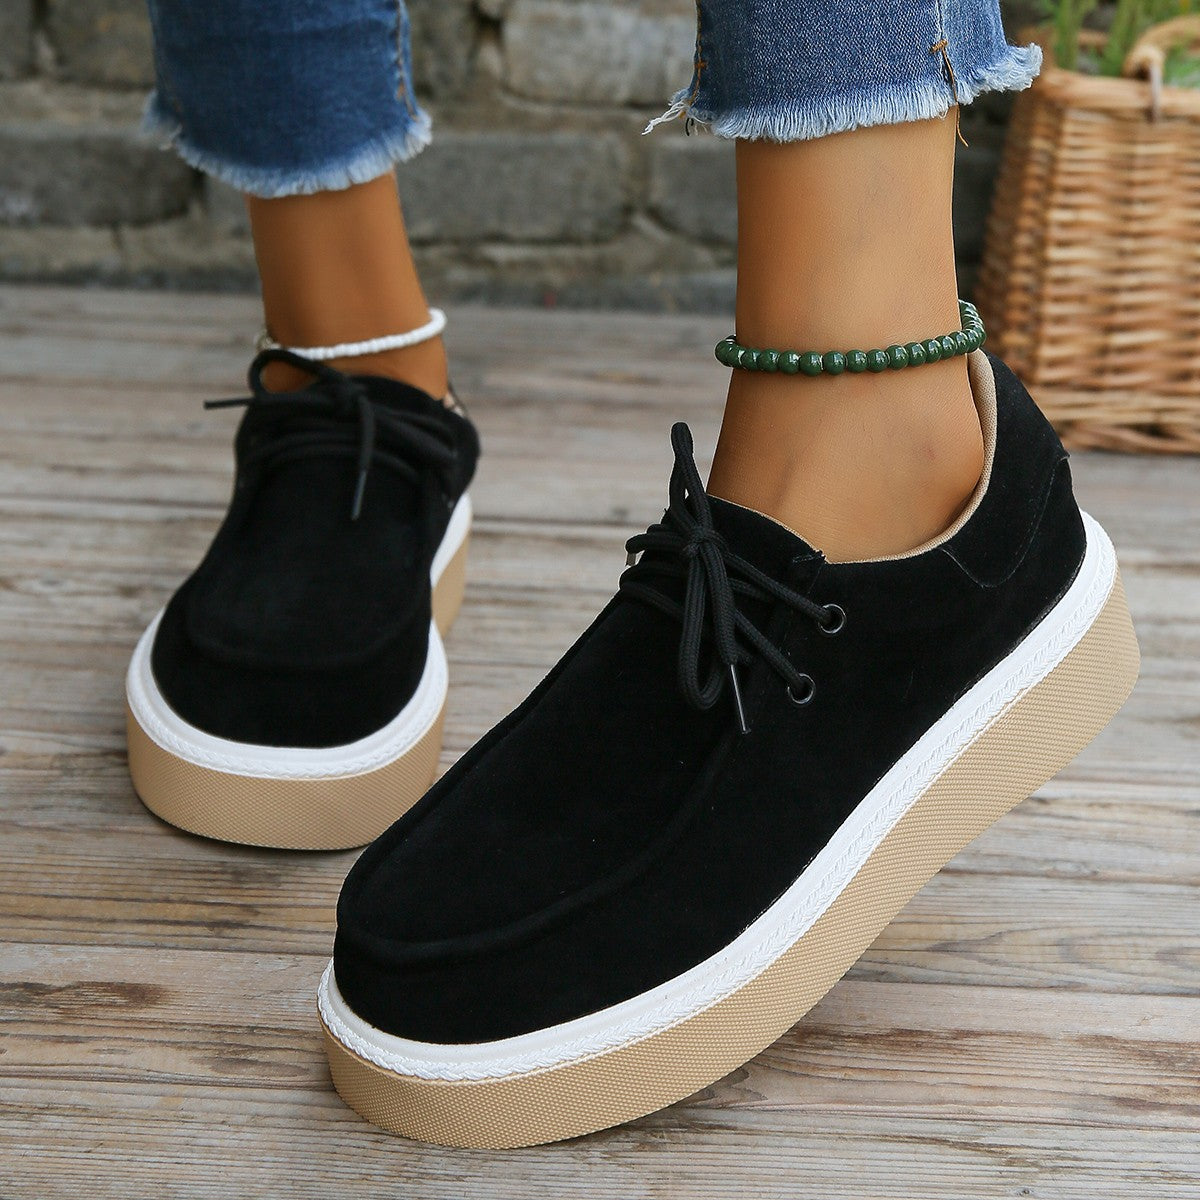 Sneakers  | New Thick Bottom Lace-up Flats Women Solid Color Casual Fashion Lightweight Sneakers | Black |  Size36| thecurvestory.myshopify.com